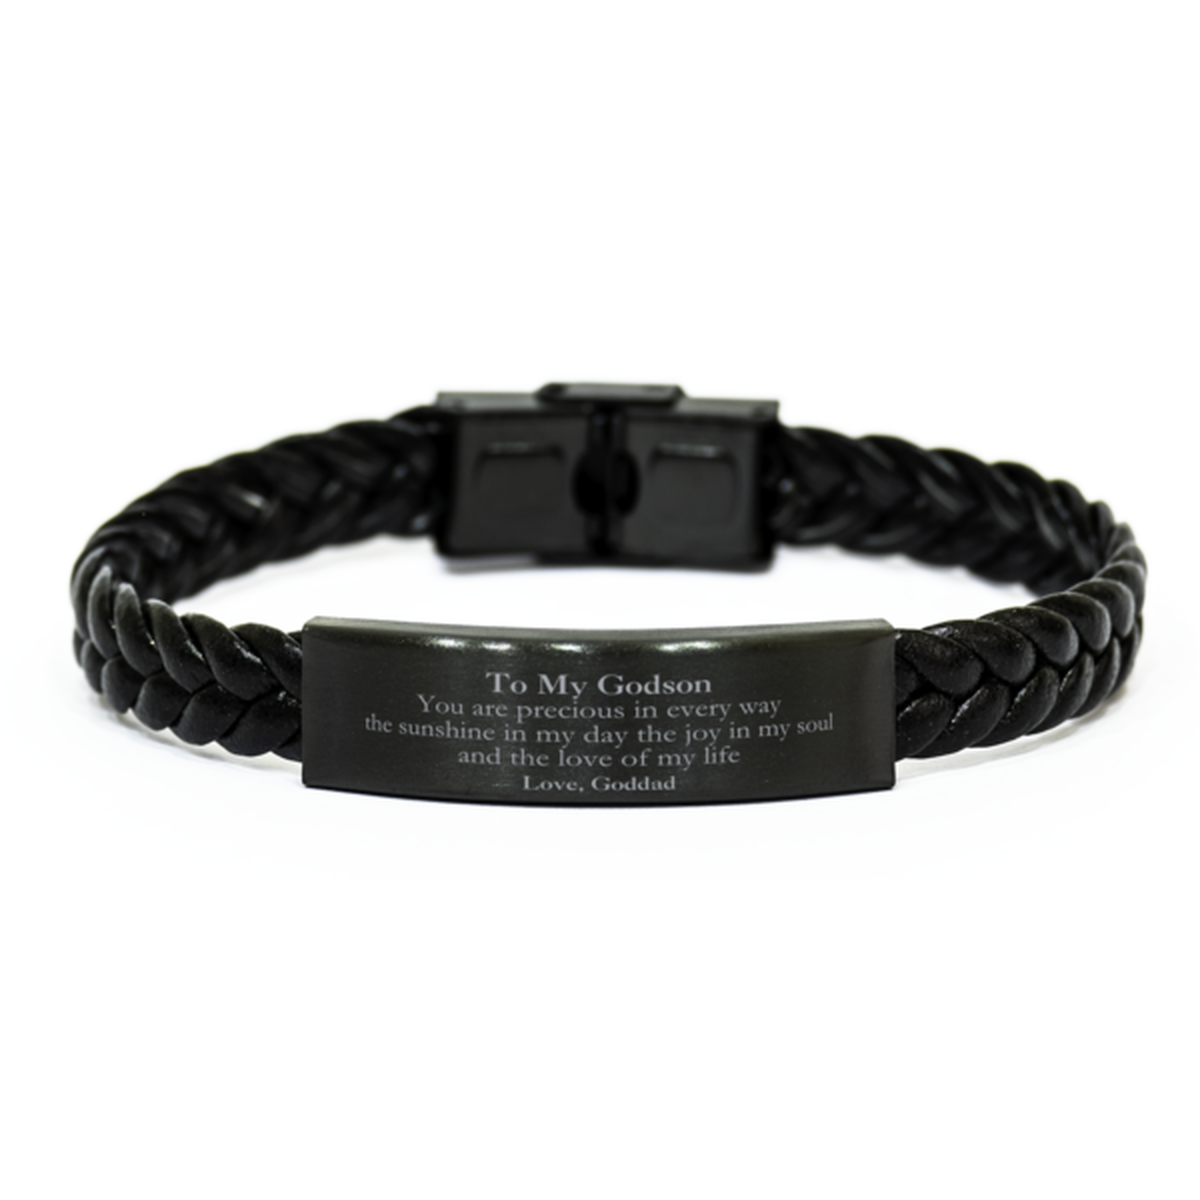 Graduation Gifts for Godson Braided Leather Bracelet Present from Goddad, Christmas Godson Birthday Gifts Godson You are precious in every way the sunshine in my day. Love, Goddad